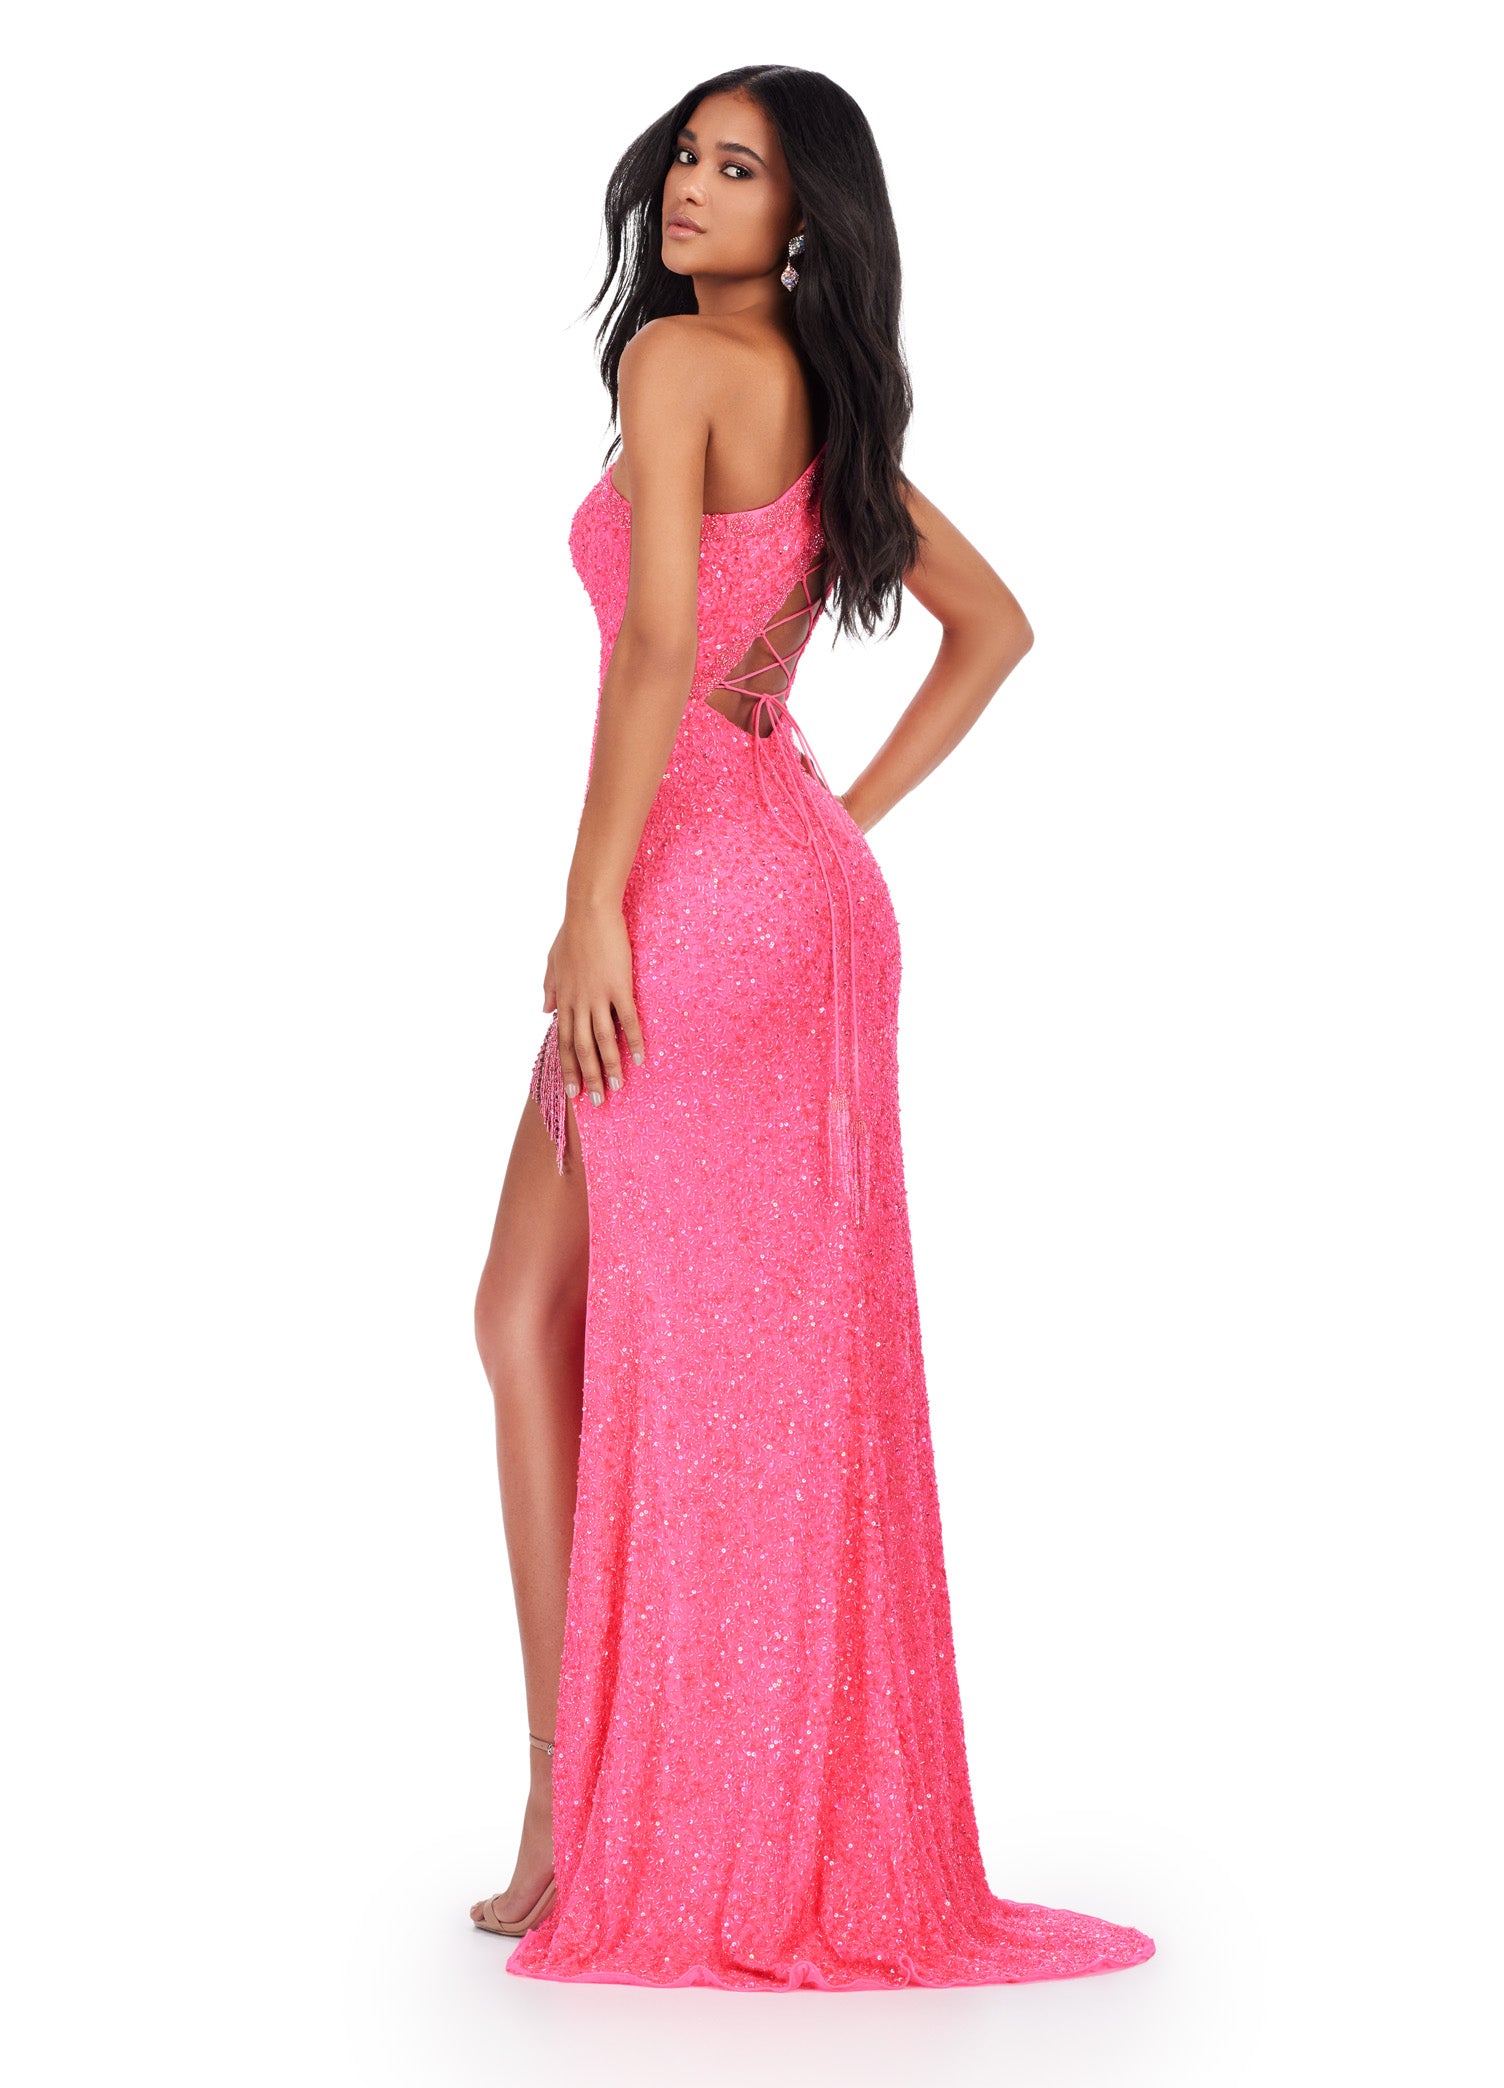 Indulge in the luxurious elegance of the Ashley Lauren 11449 Long Prom Dress. This stunning gown features a gorgeous sequin one shoulder design and an asymmetrical lace up back, perfect for making a bold statement at any formal occasion. With its intricate lace detailing and flattering silhouette, this gown is sure to turn heads and make you feel like a pageant queen.